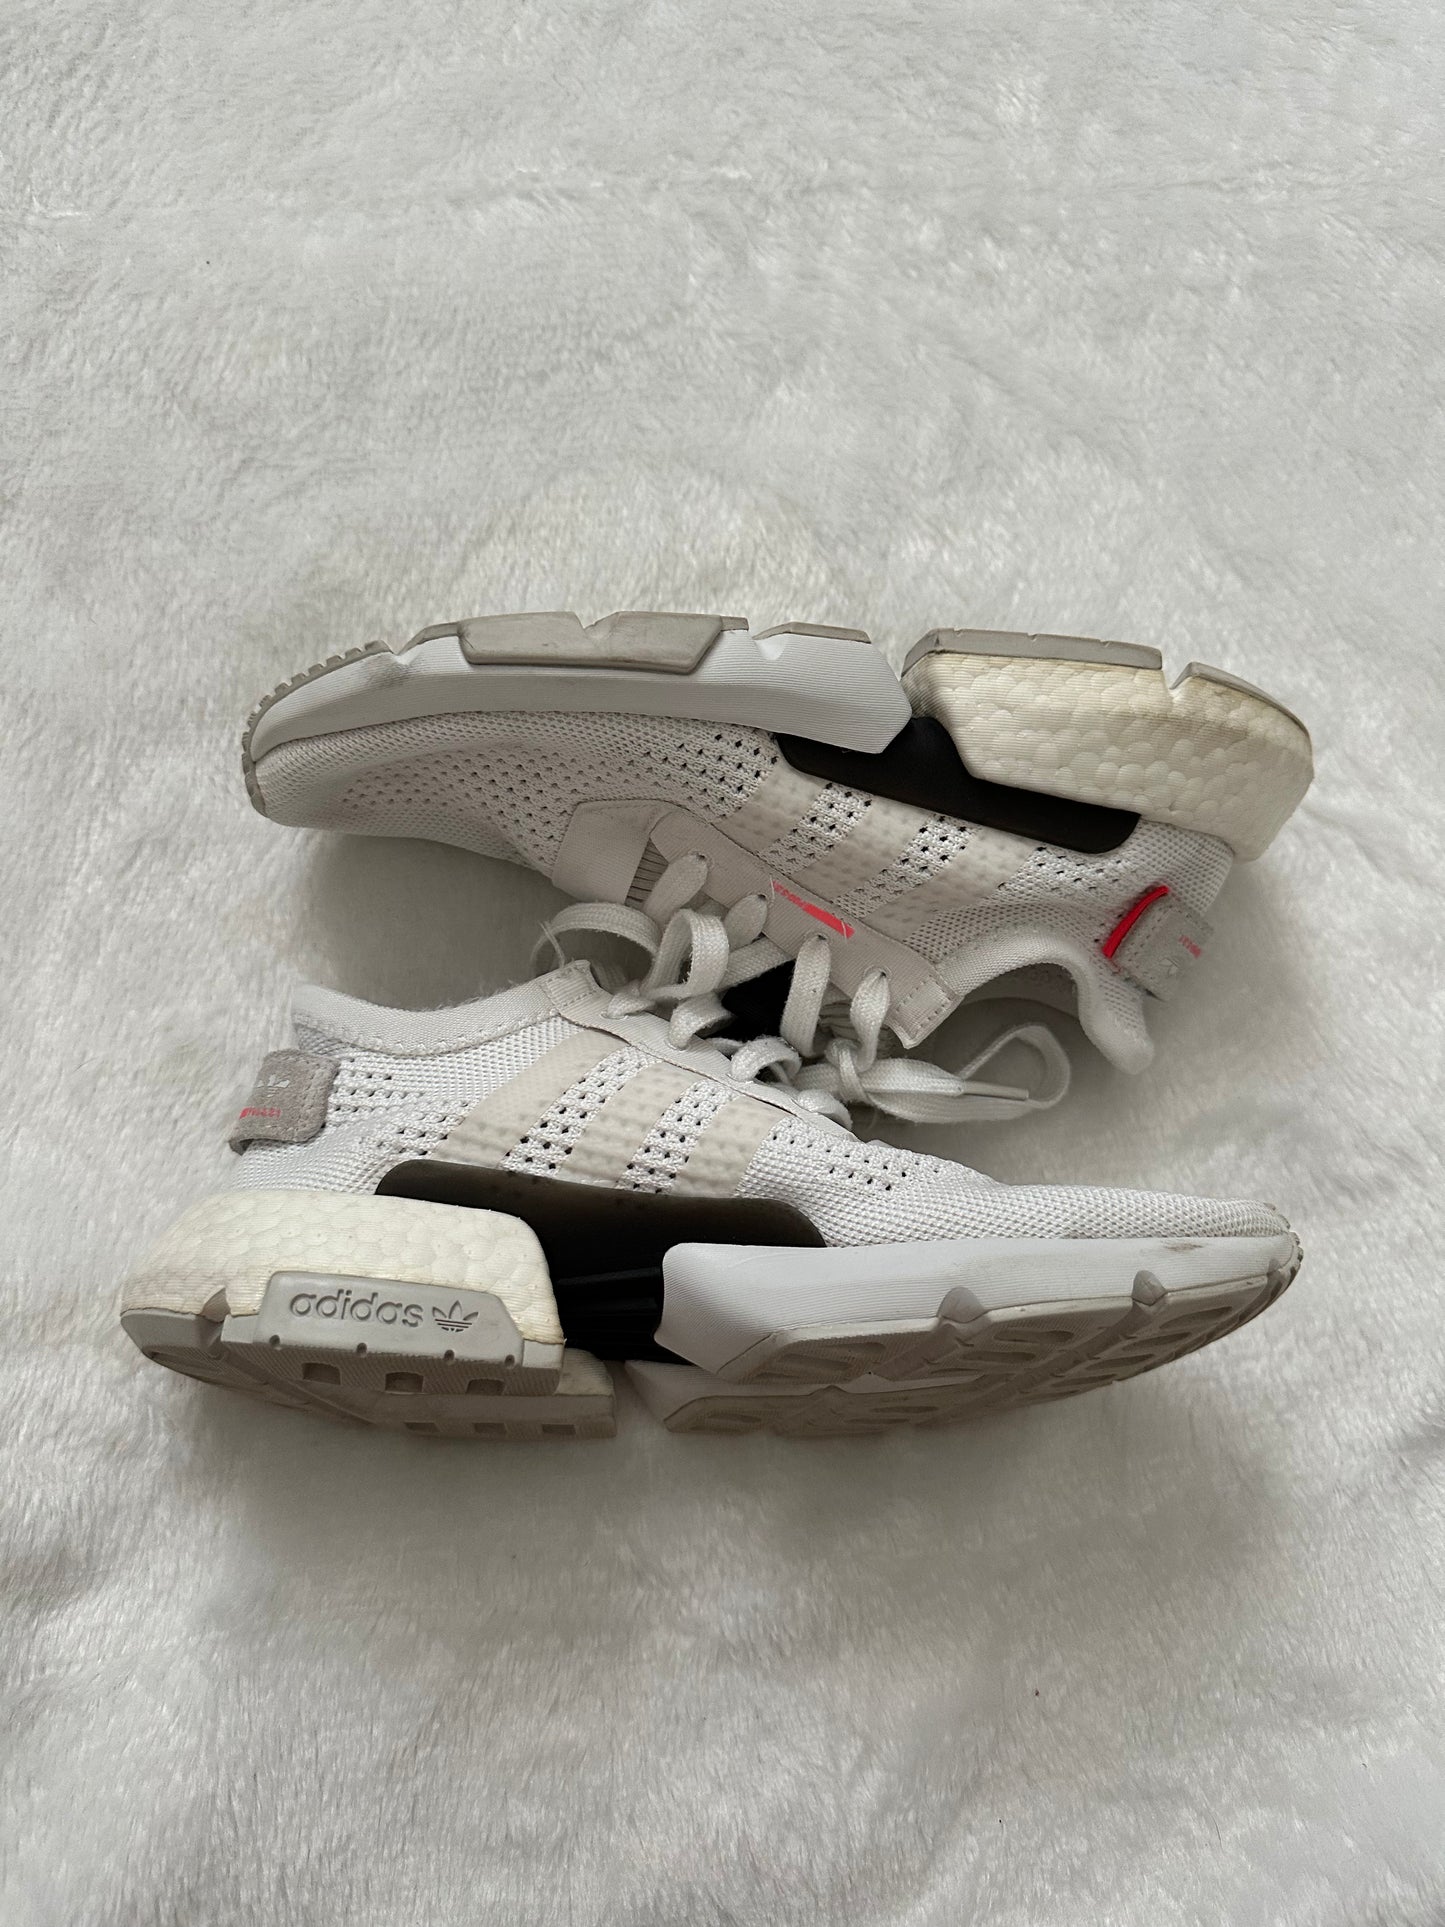 Adidas POD S3.1 Sneakers